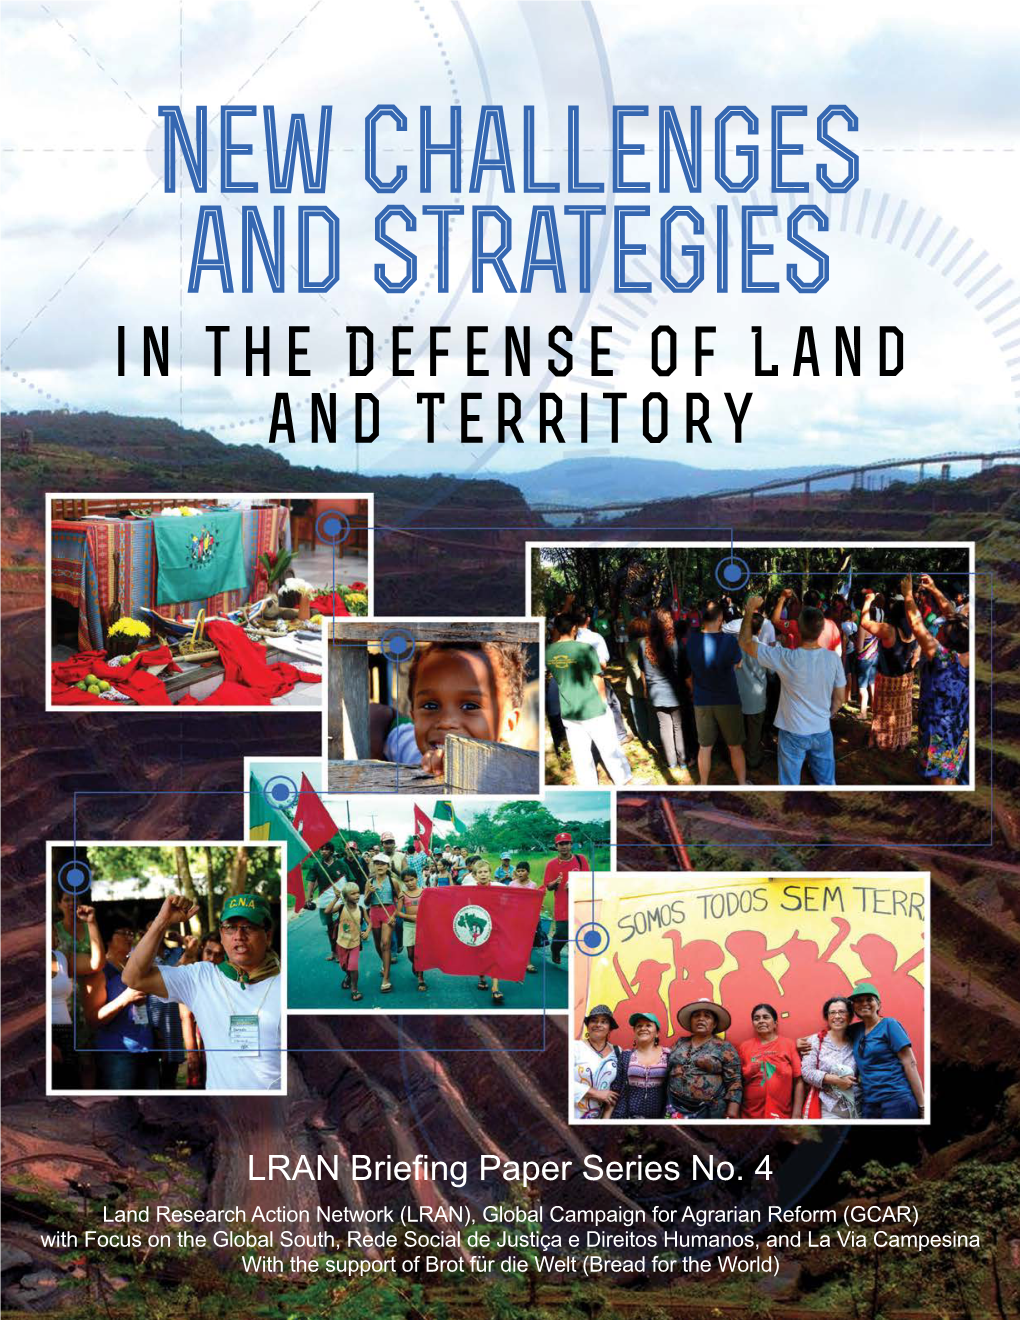 In the Defense of Land and Territory